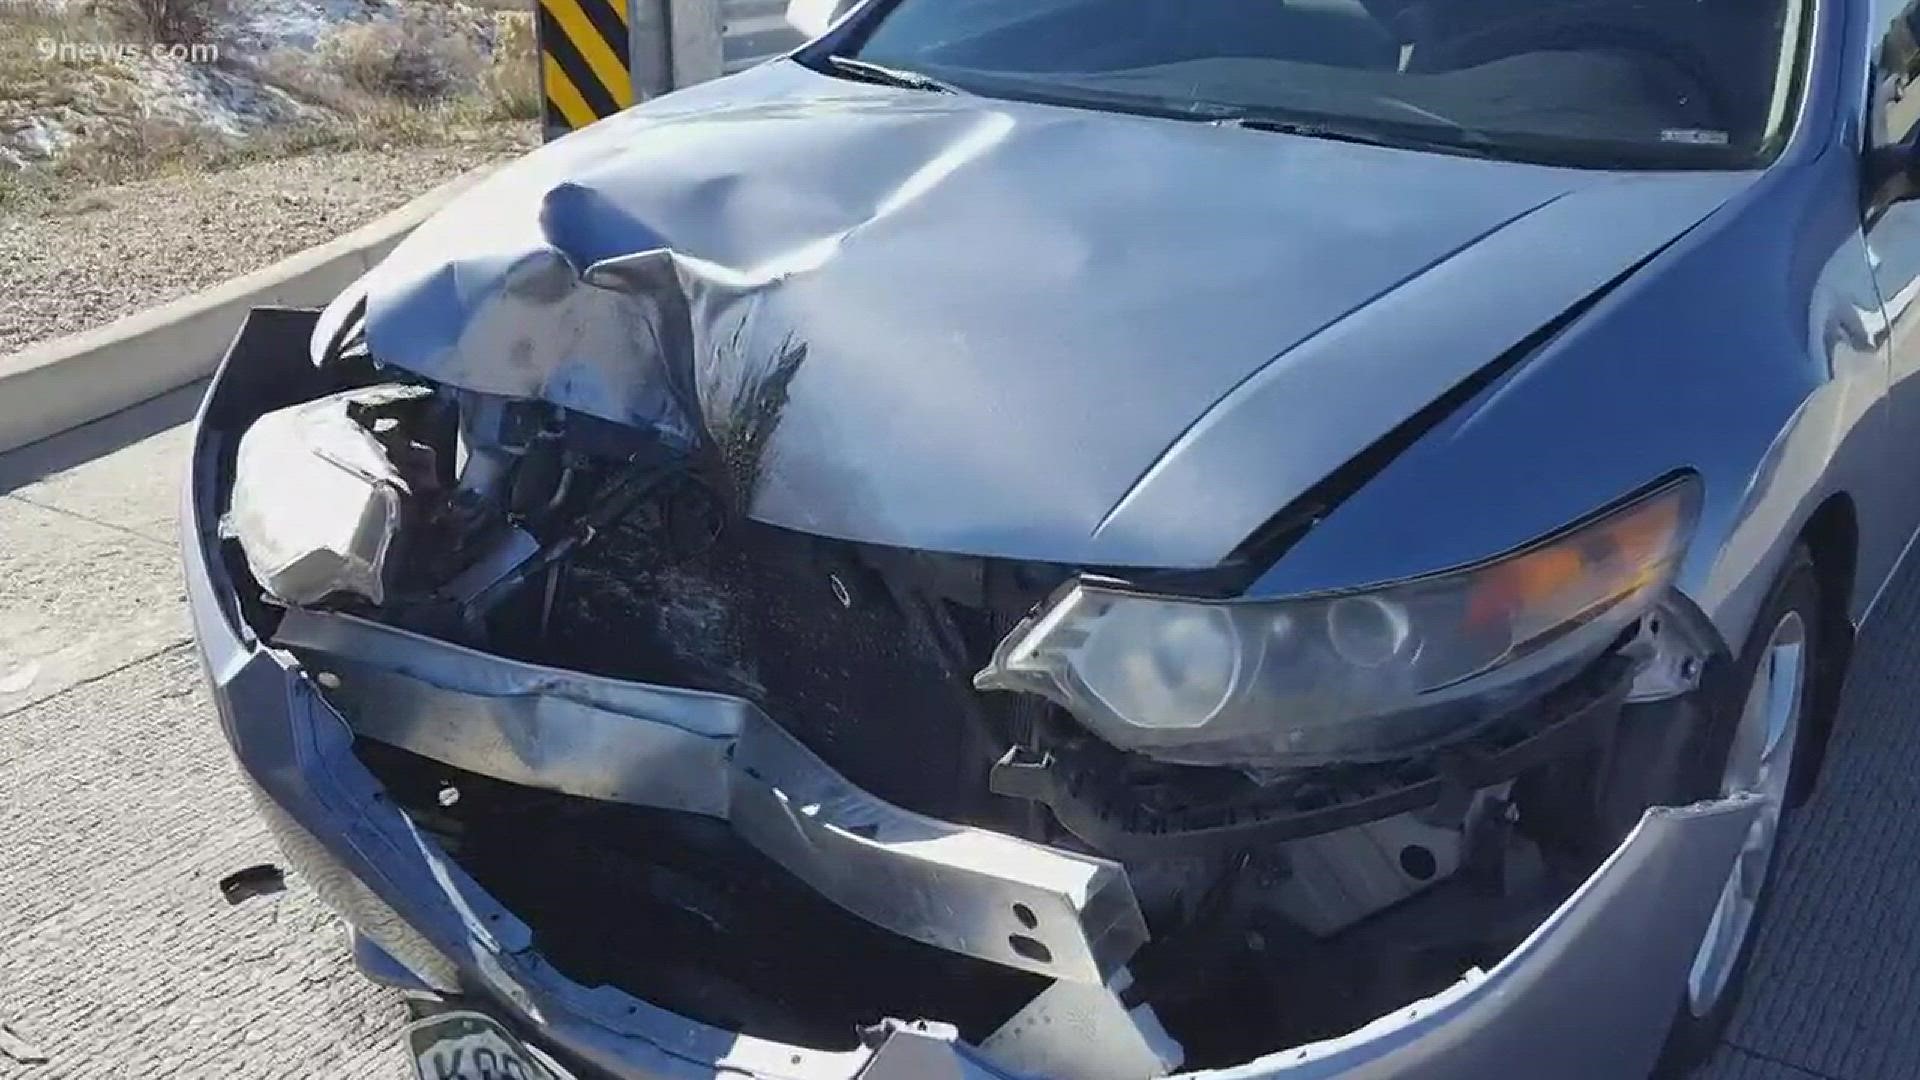 We see damage like this all the time in highway crashes - but this time it wasn't a car that caused it. Instead, it was a speeding tire. She's OK because she reacted the right way. Here's her story.